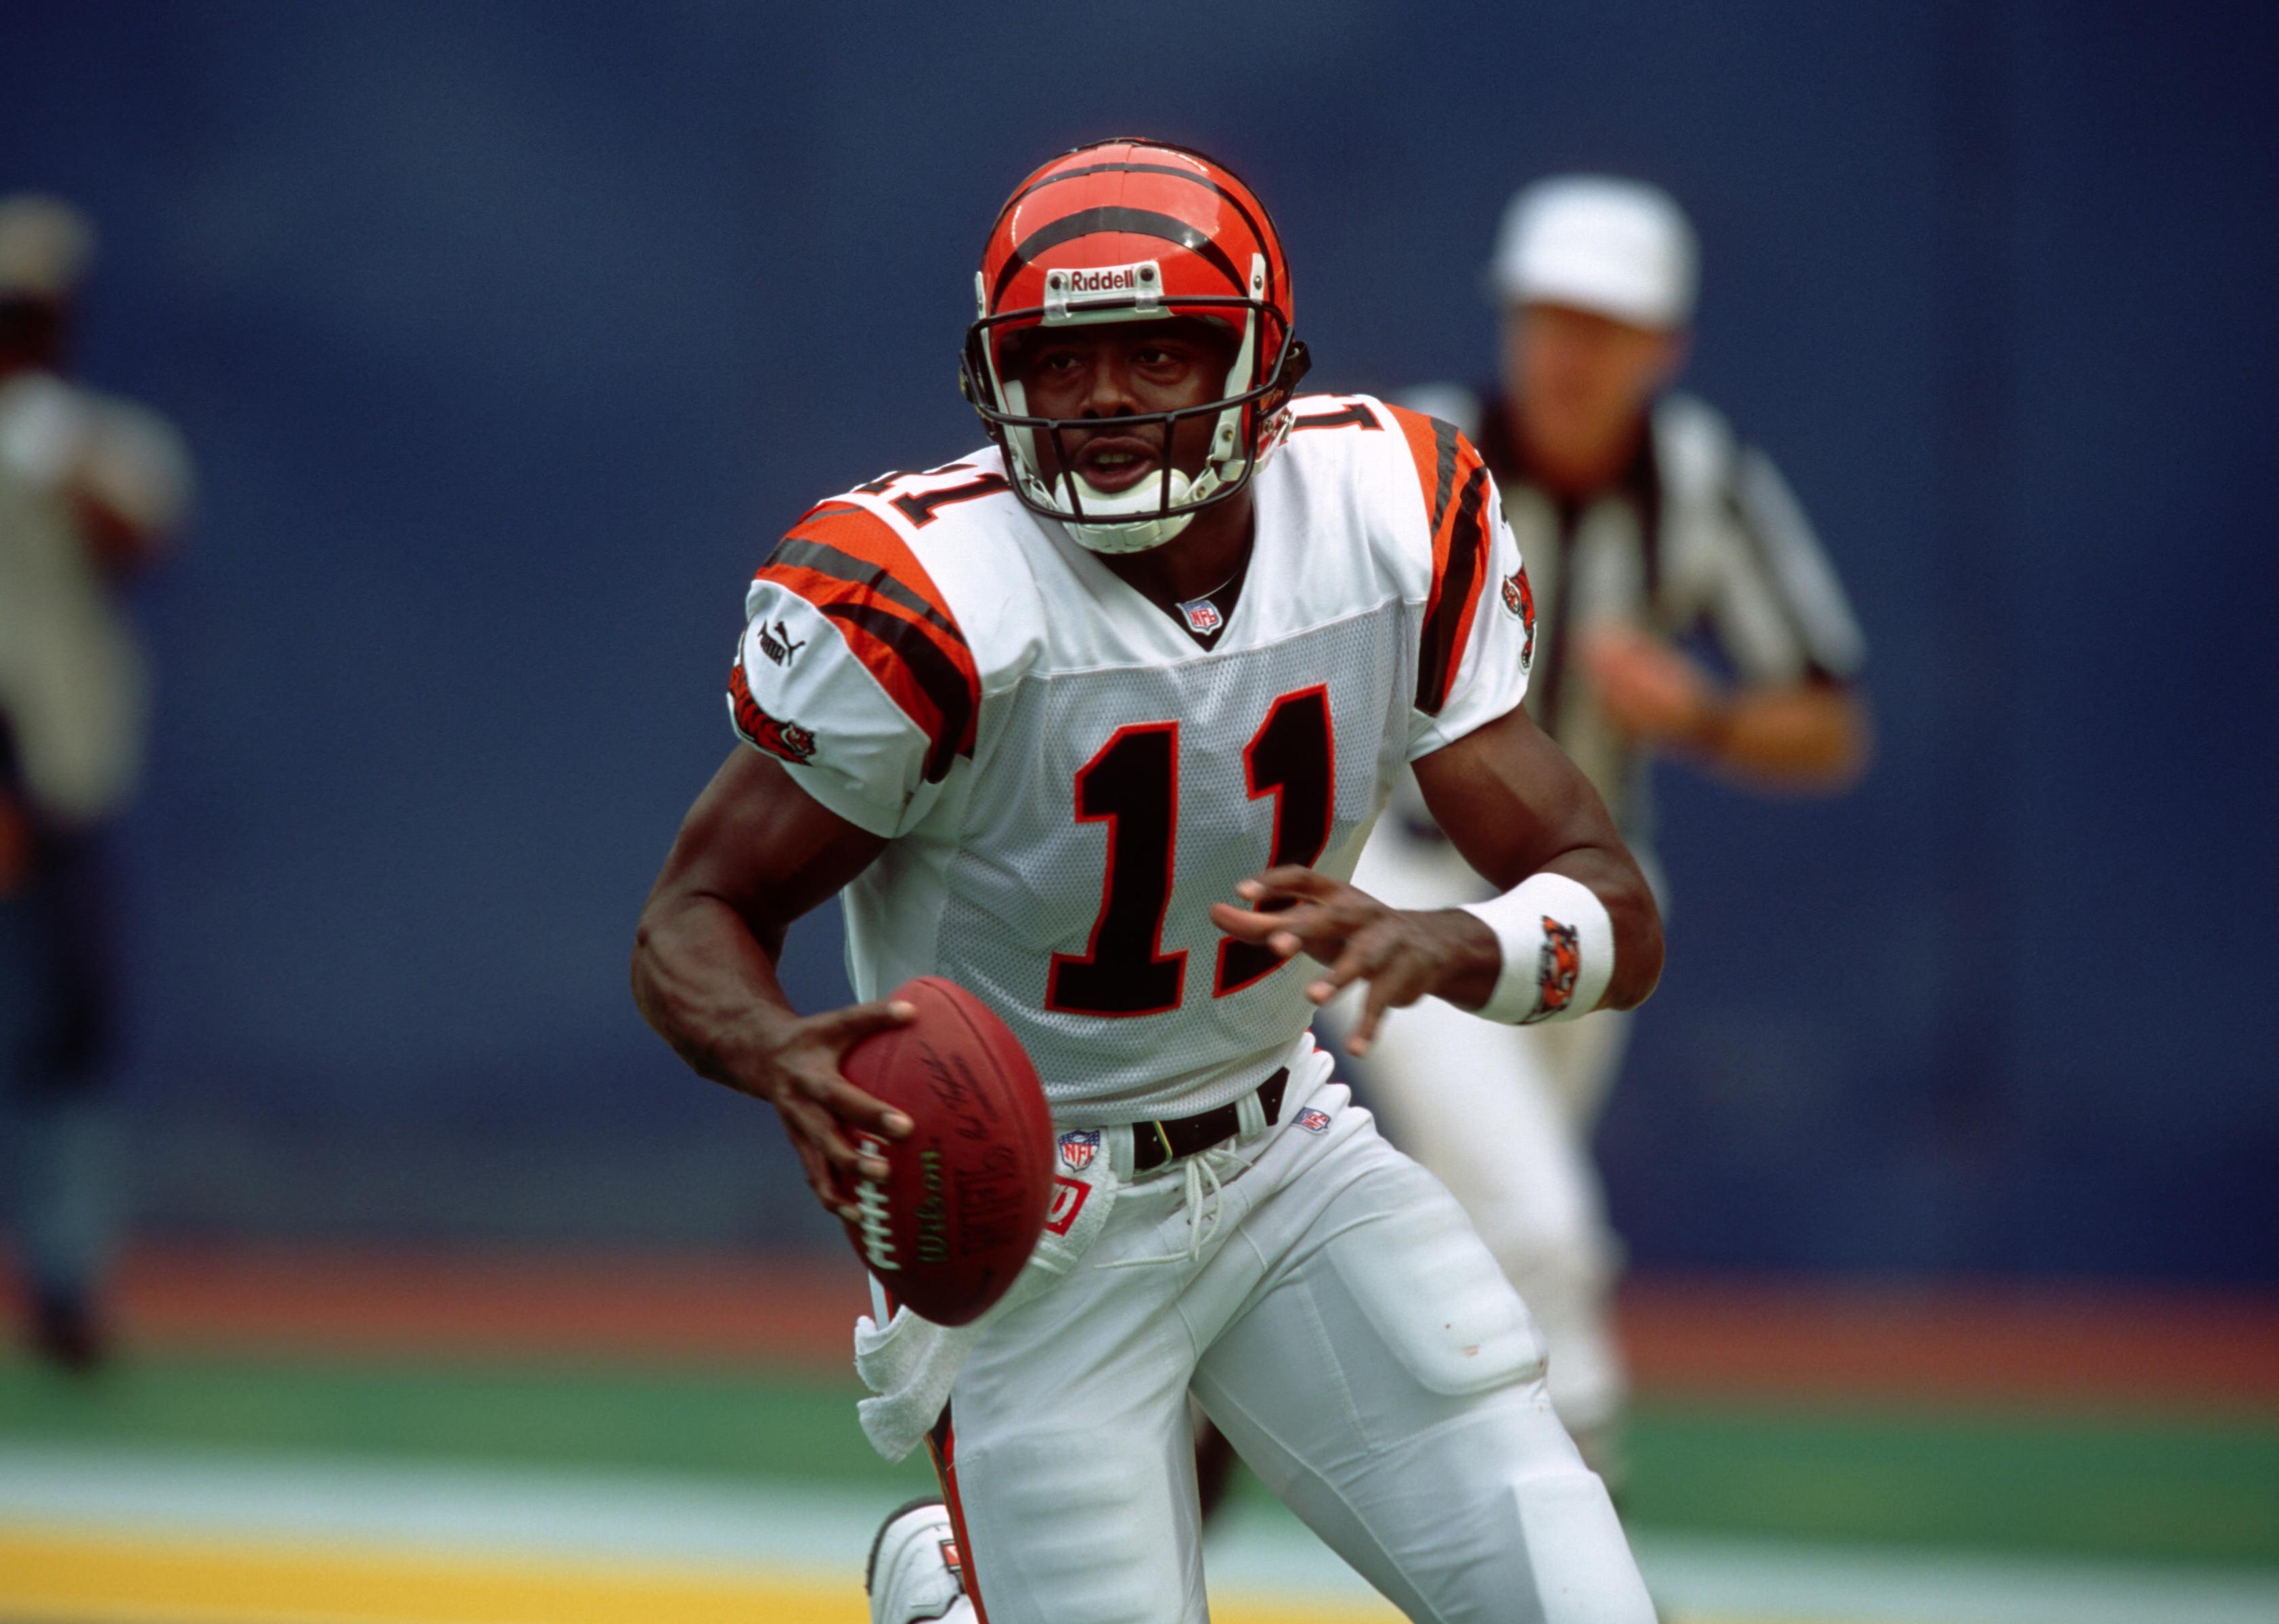 Quarterback Akili Smith of the Cincinnati Bengals scrambles while looking to pass.